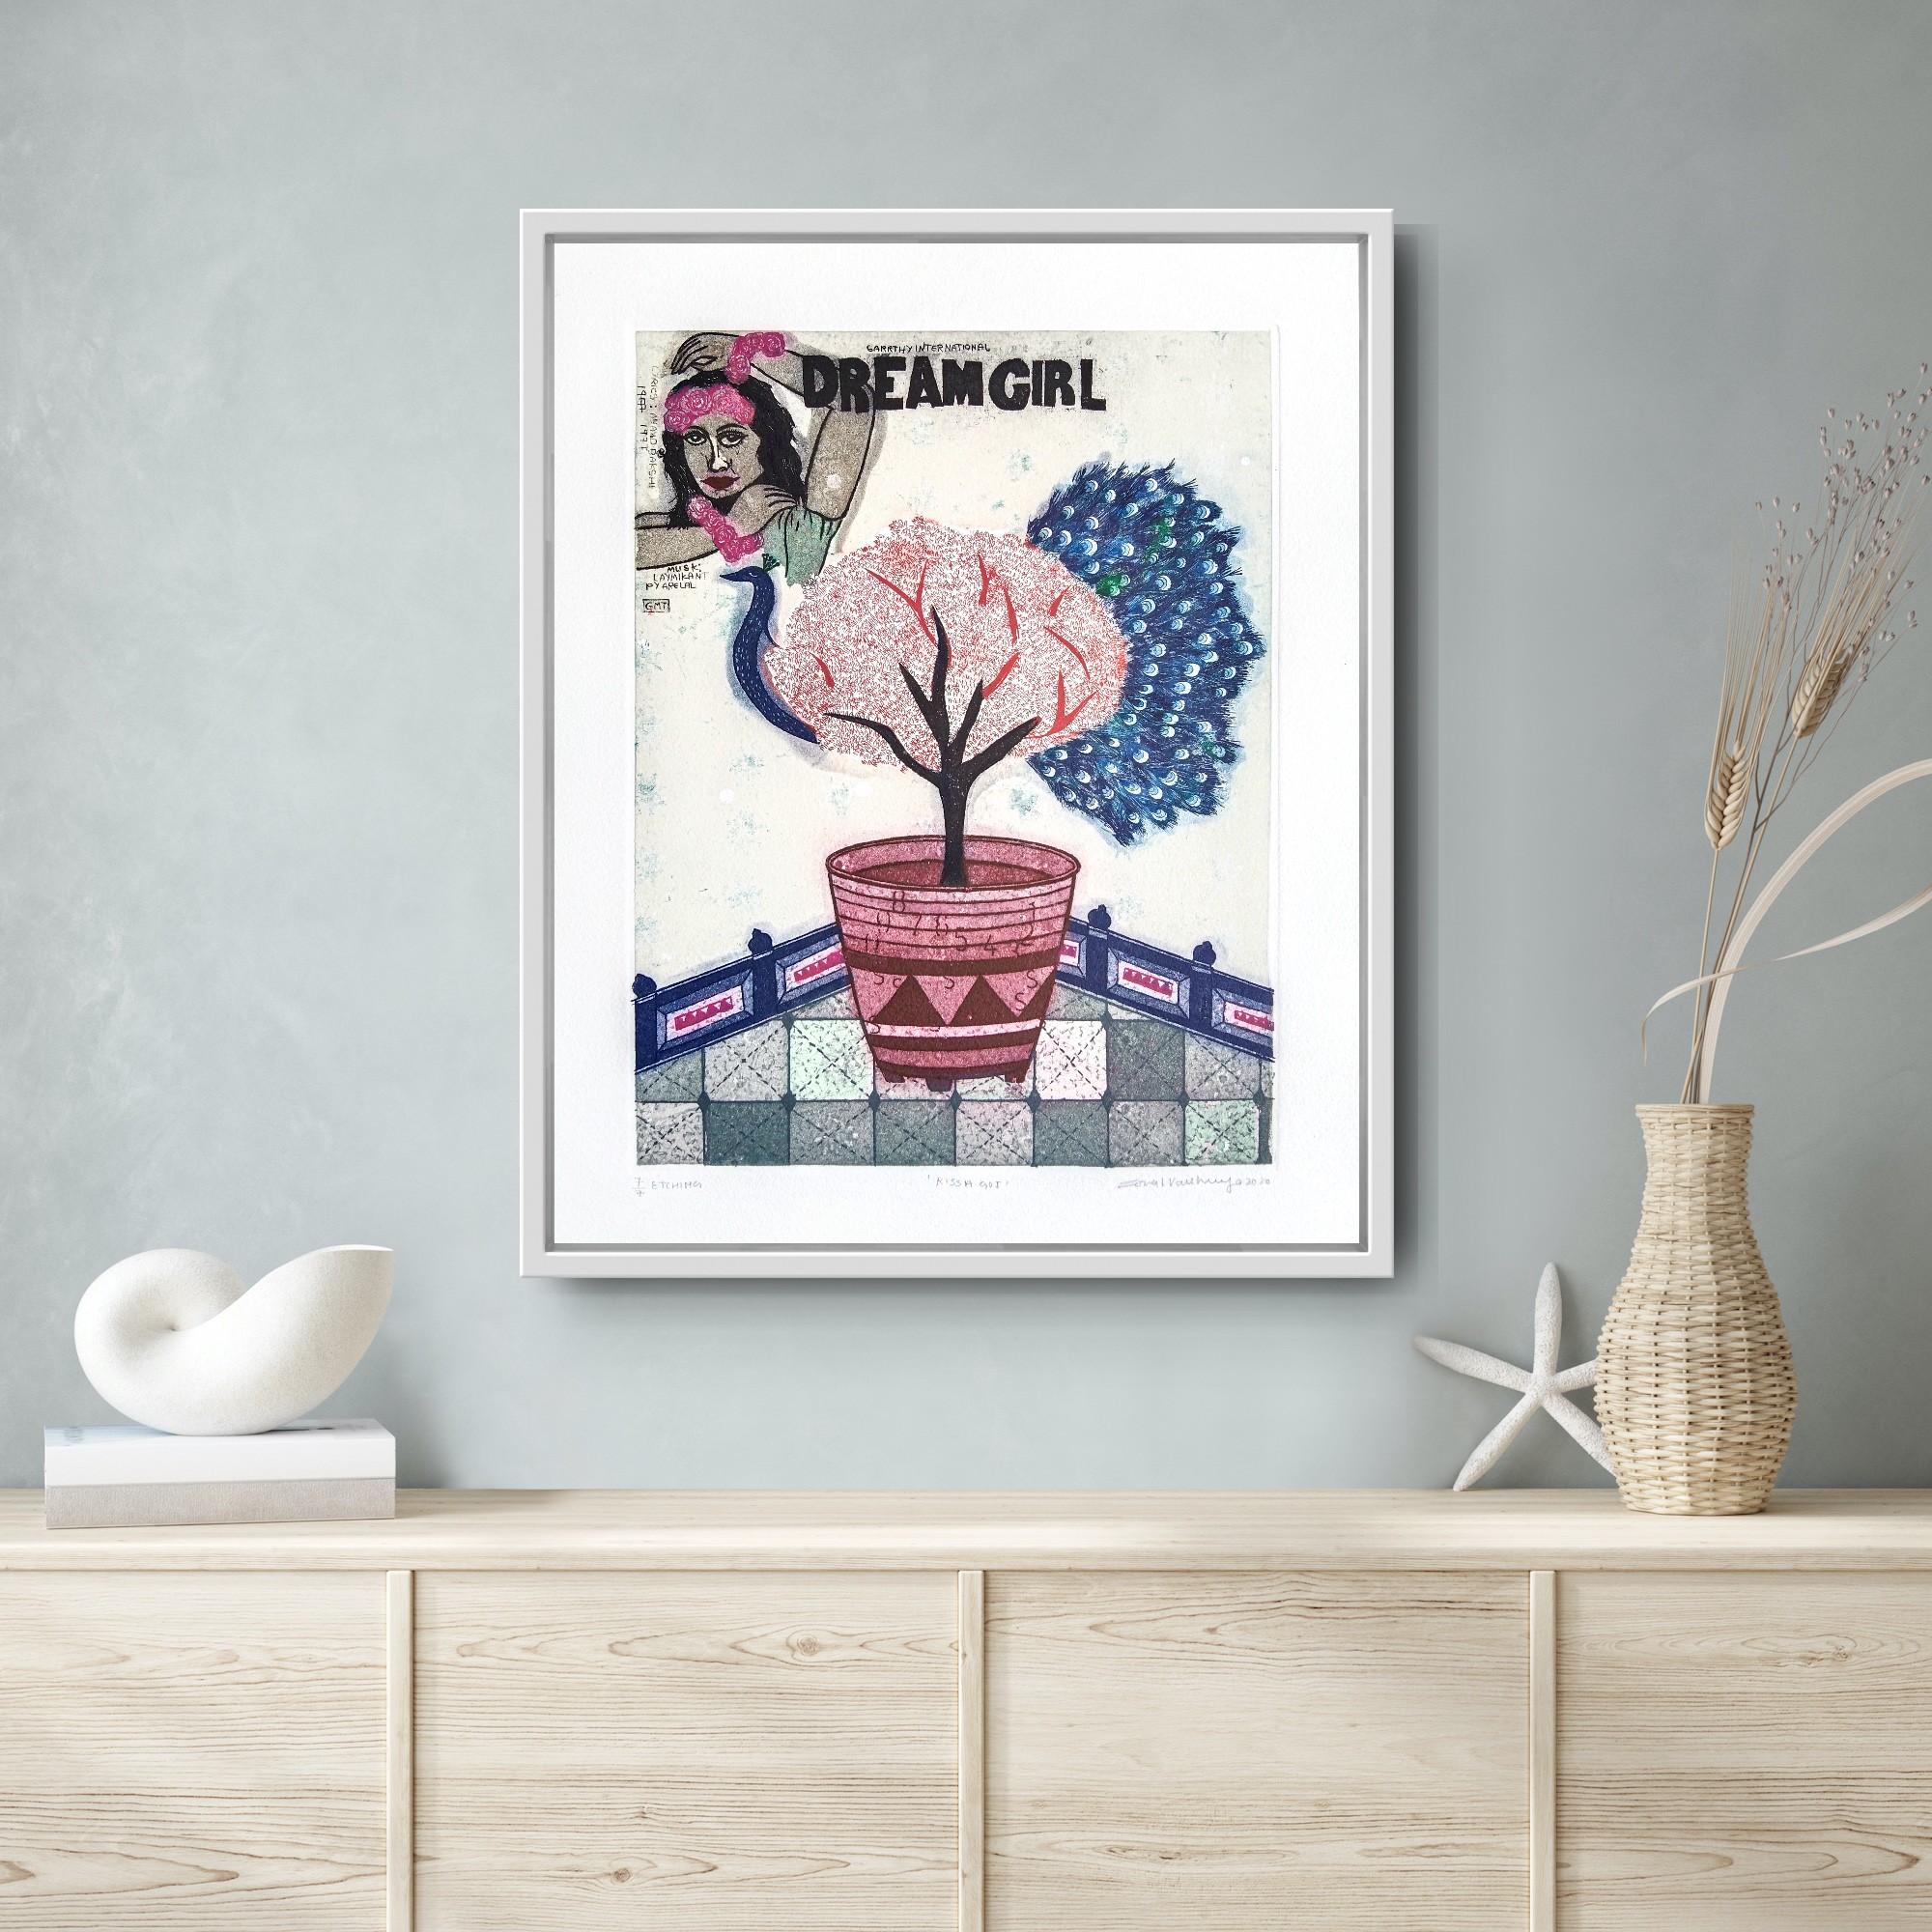 Pop Art Ltd Edition 2/5 Etching Lucknow Indian Artist Woman Girl Pink Blue Tree For Sale 12